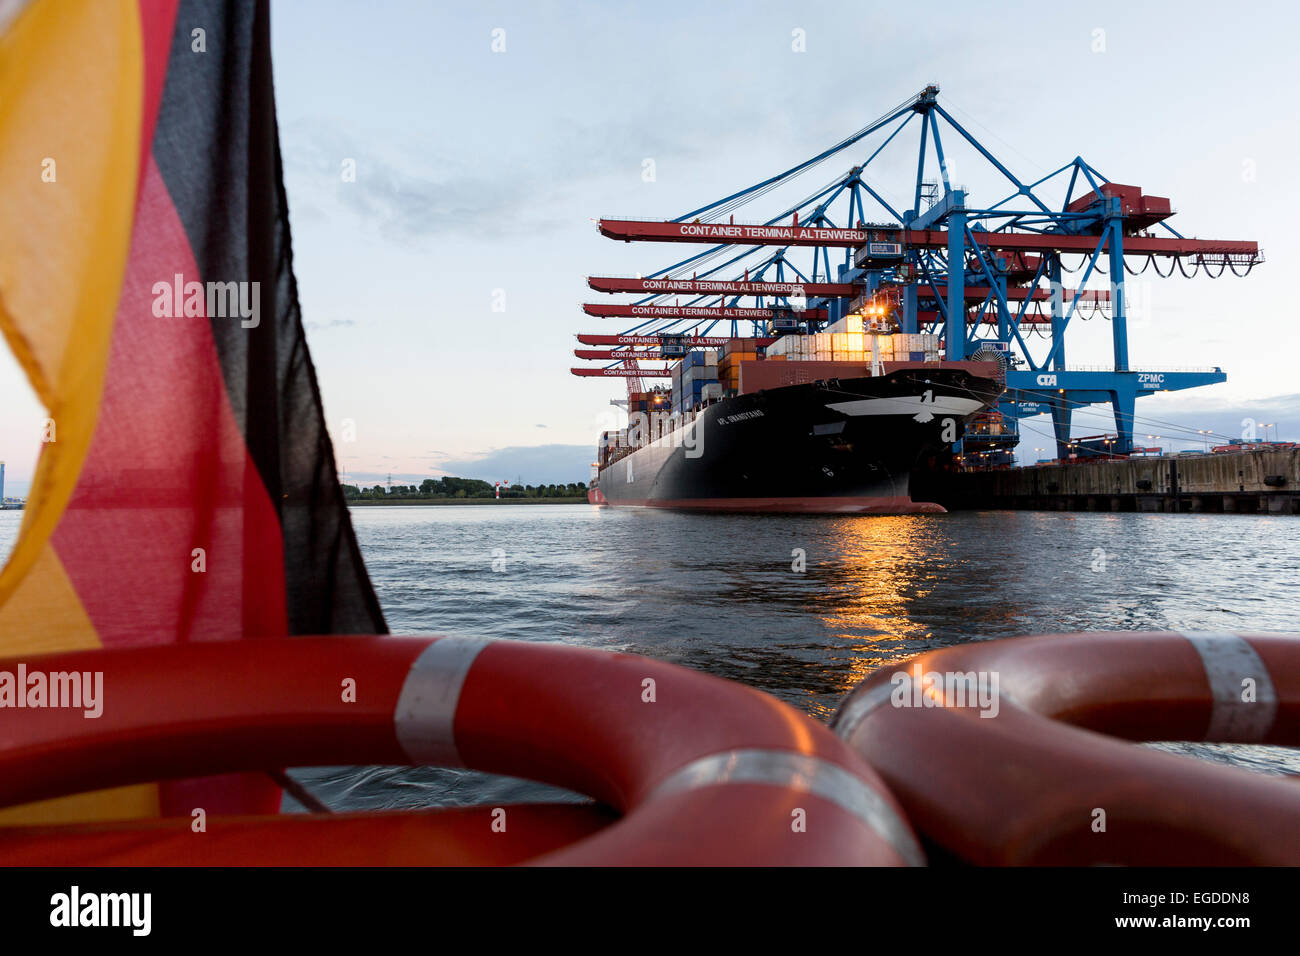 Container ship loading and unloading the container terminal Altenwerder, Hamburg, Germany Stock Photo